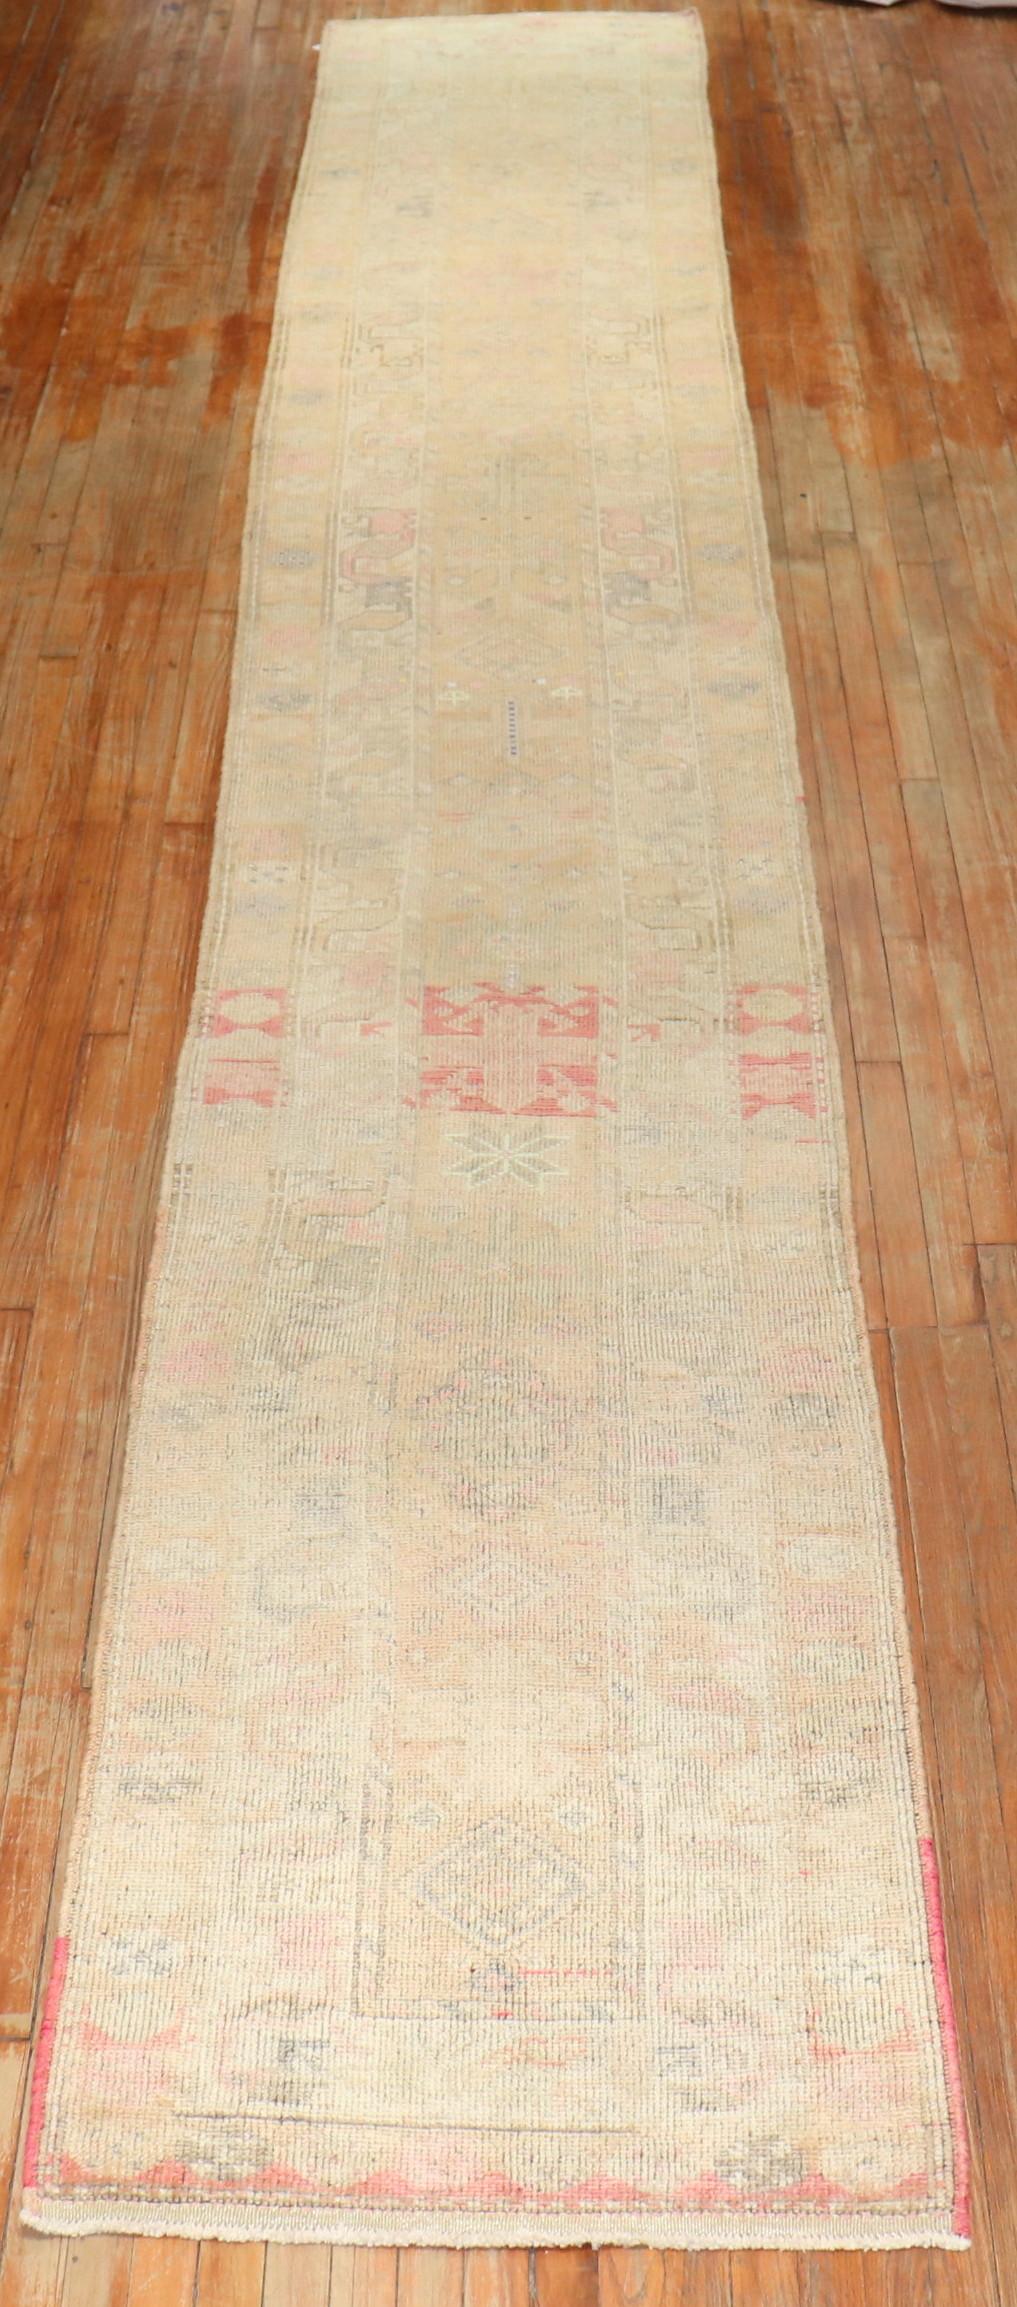 A rare long and narrow 20th century Turkish geometric mted runner.

Measures: 2'9